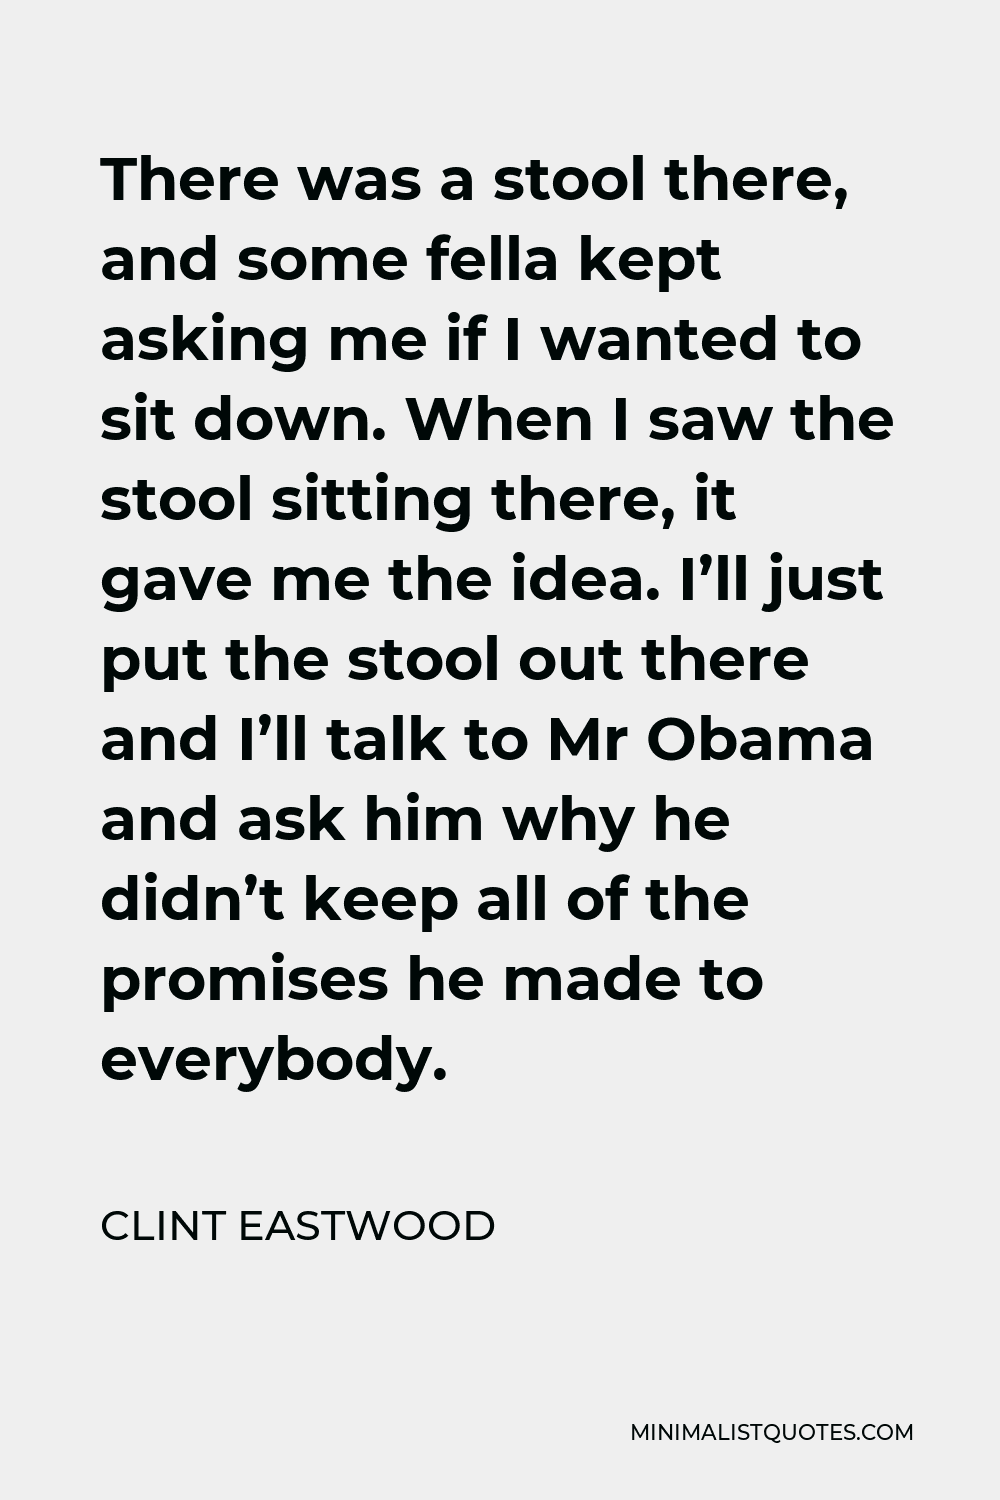 Clint Eastwood Quote - There was a stool there, and some fella kept asking me if I wanted to sit down. When I saw the stool sitting there, it gave me the idea. I’ll just put the stool out there and I’ll talk to Mr Obama and ask him why he didn’t keep all of the promises he made to everybody.